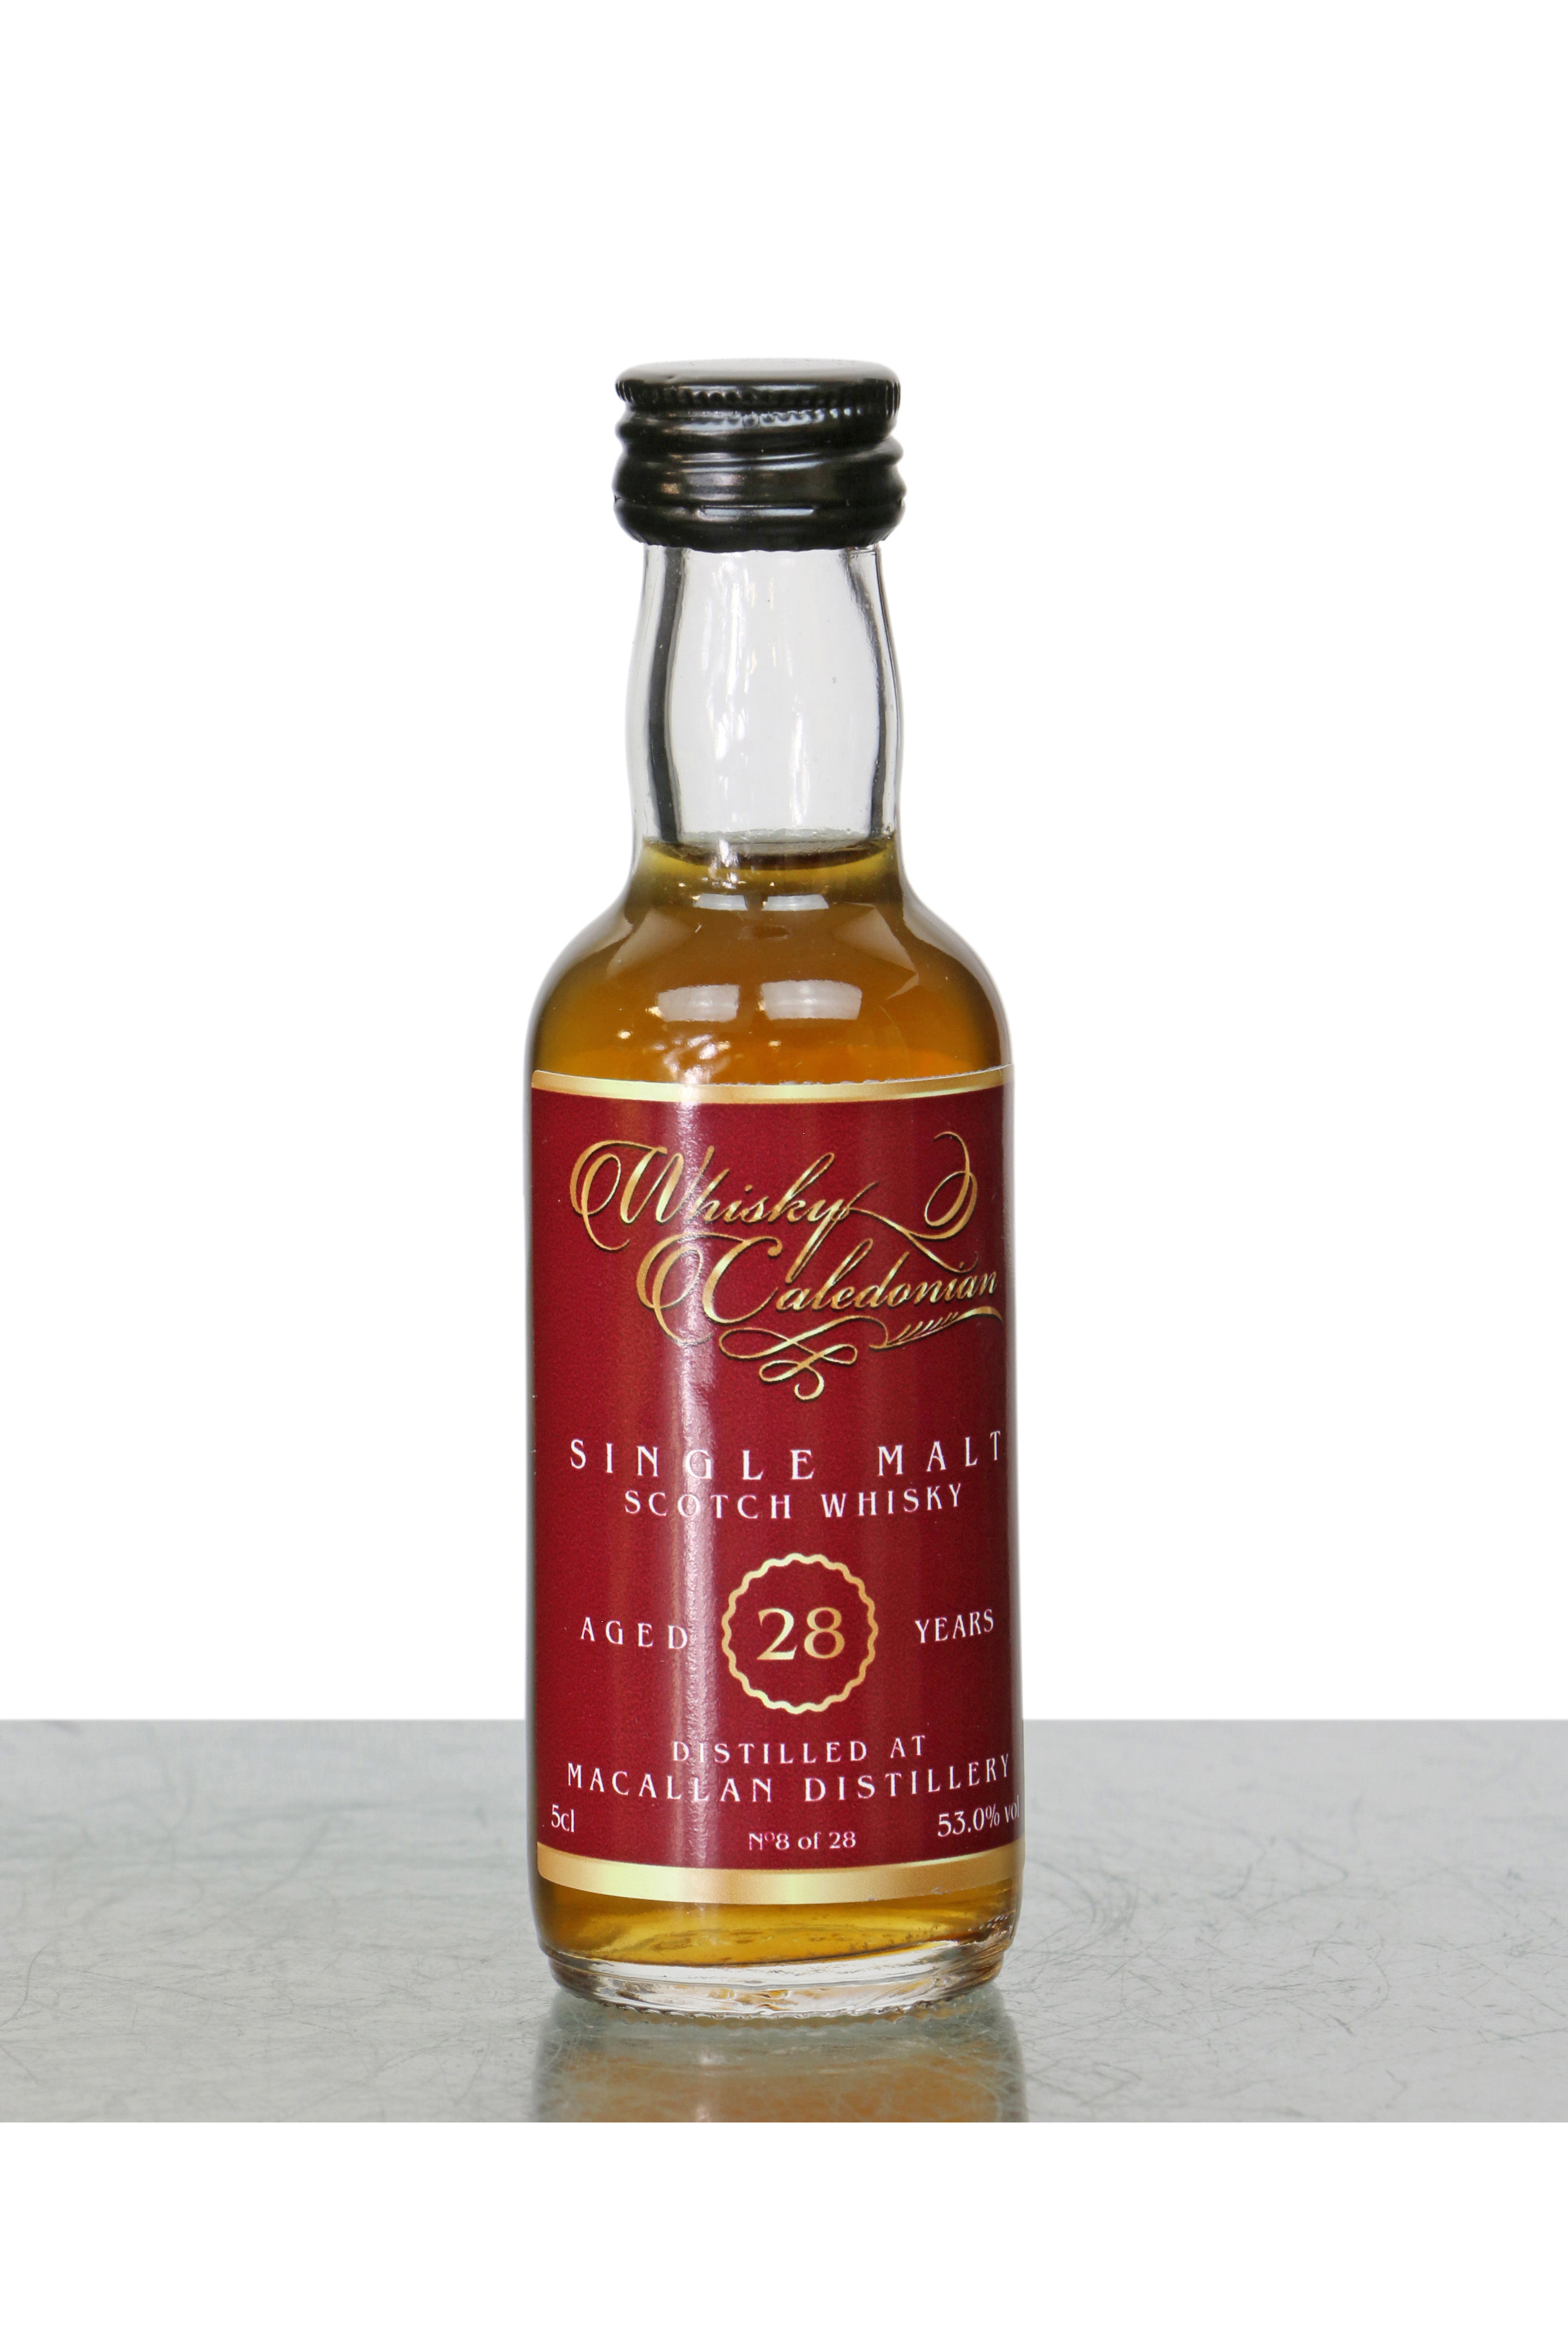 Macallan 28 Years Old - Whisky Caledonian Miniature 5cl - Just Whisky ...